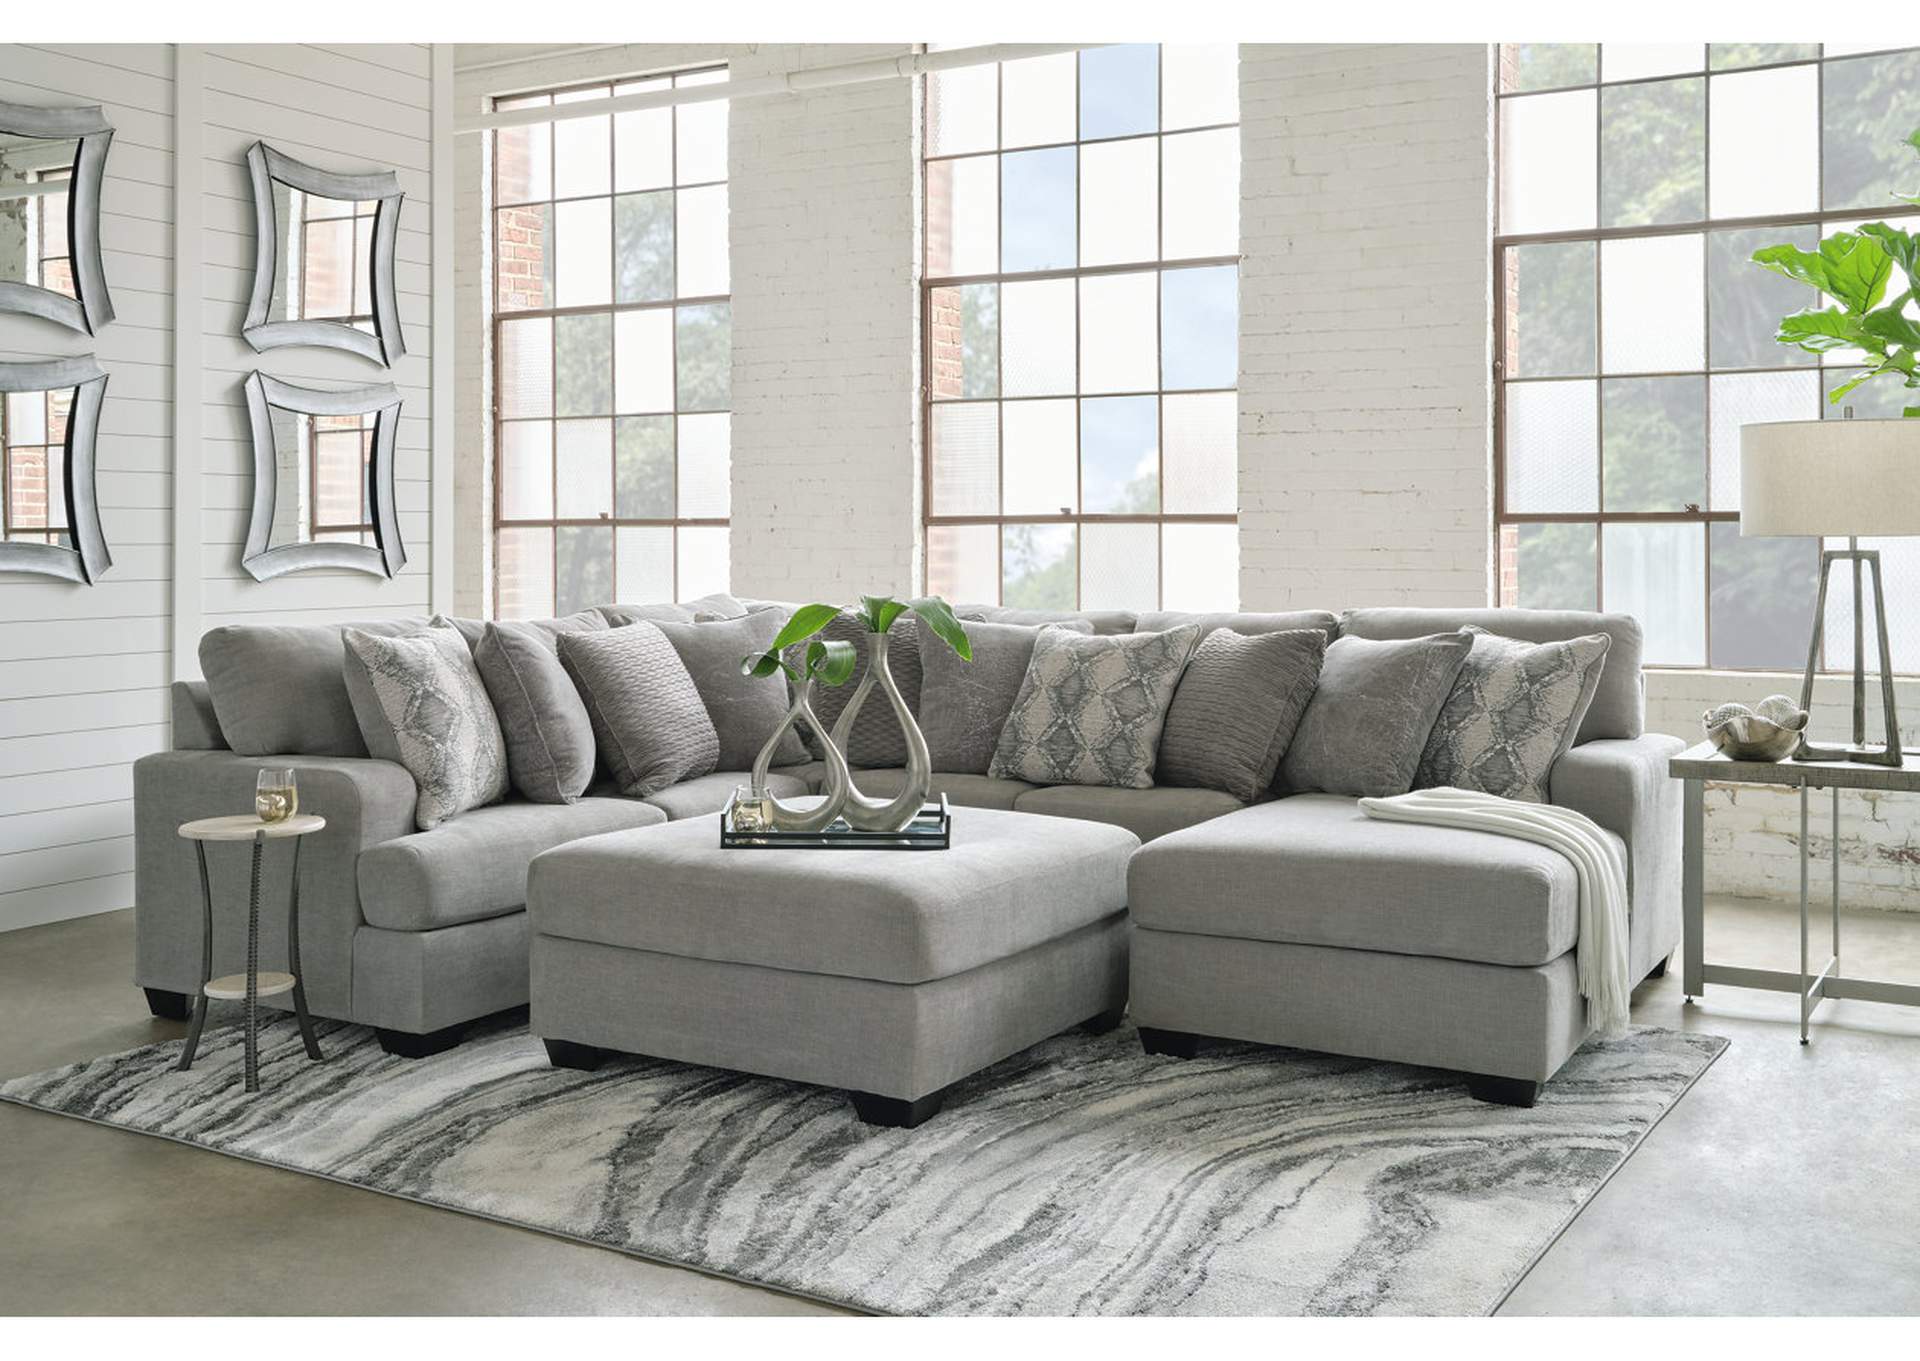 Keener 4-Piece Sectional with Ottoman,Ashley